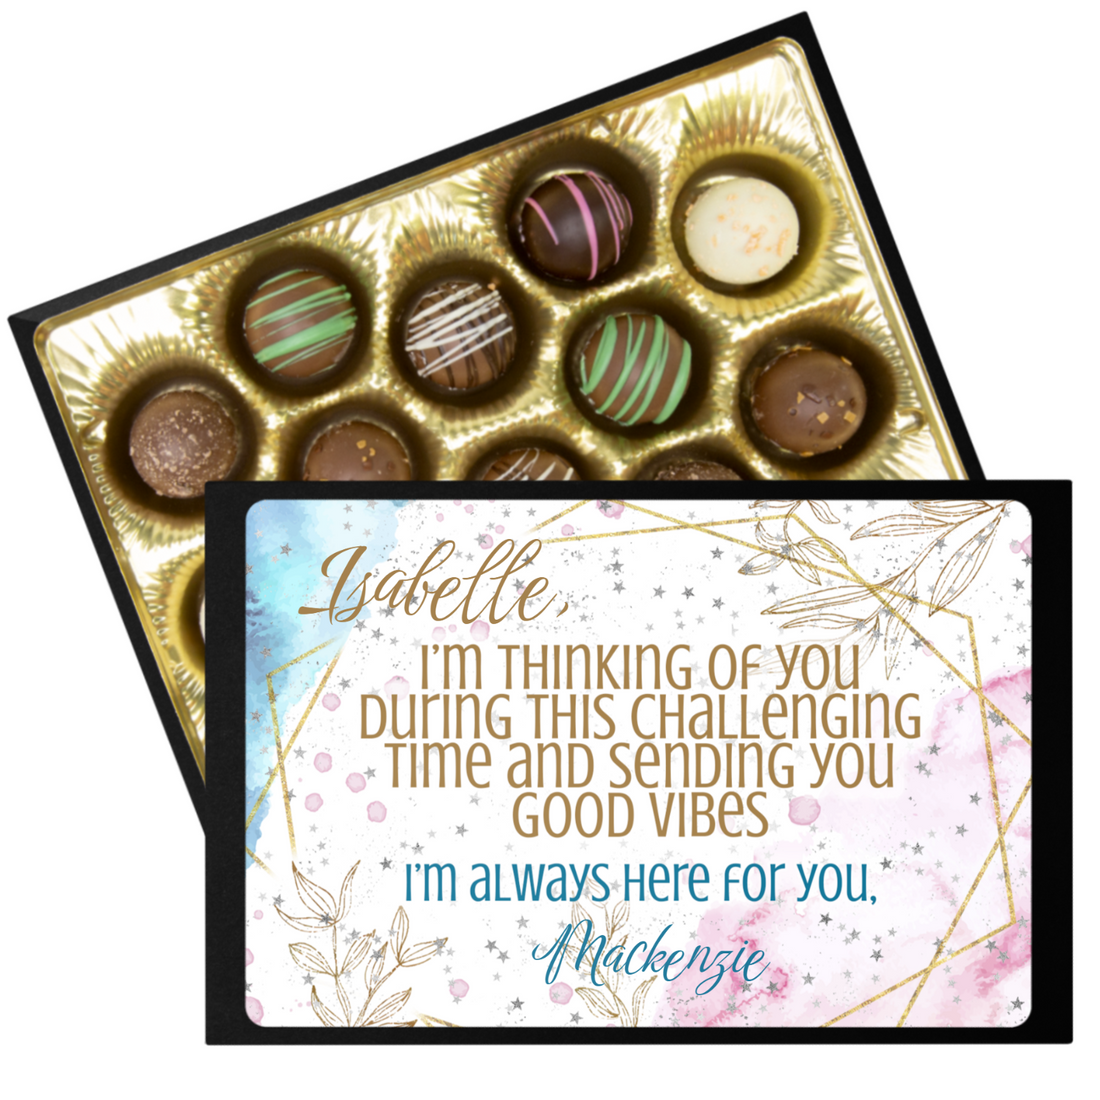 Personalized I Am Always Here For You Chocolate Box - Handmade Chocolate Truffles - Gift for Friends - Customized Chocolate Gift